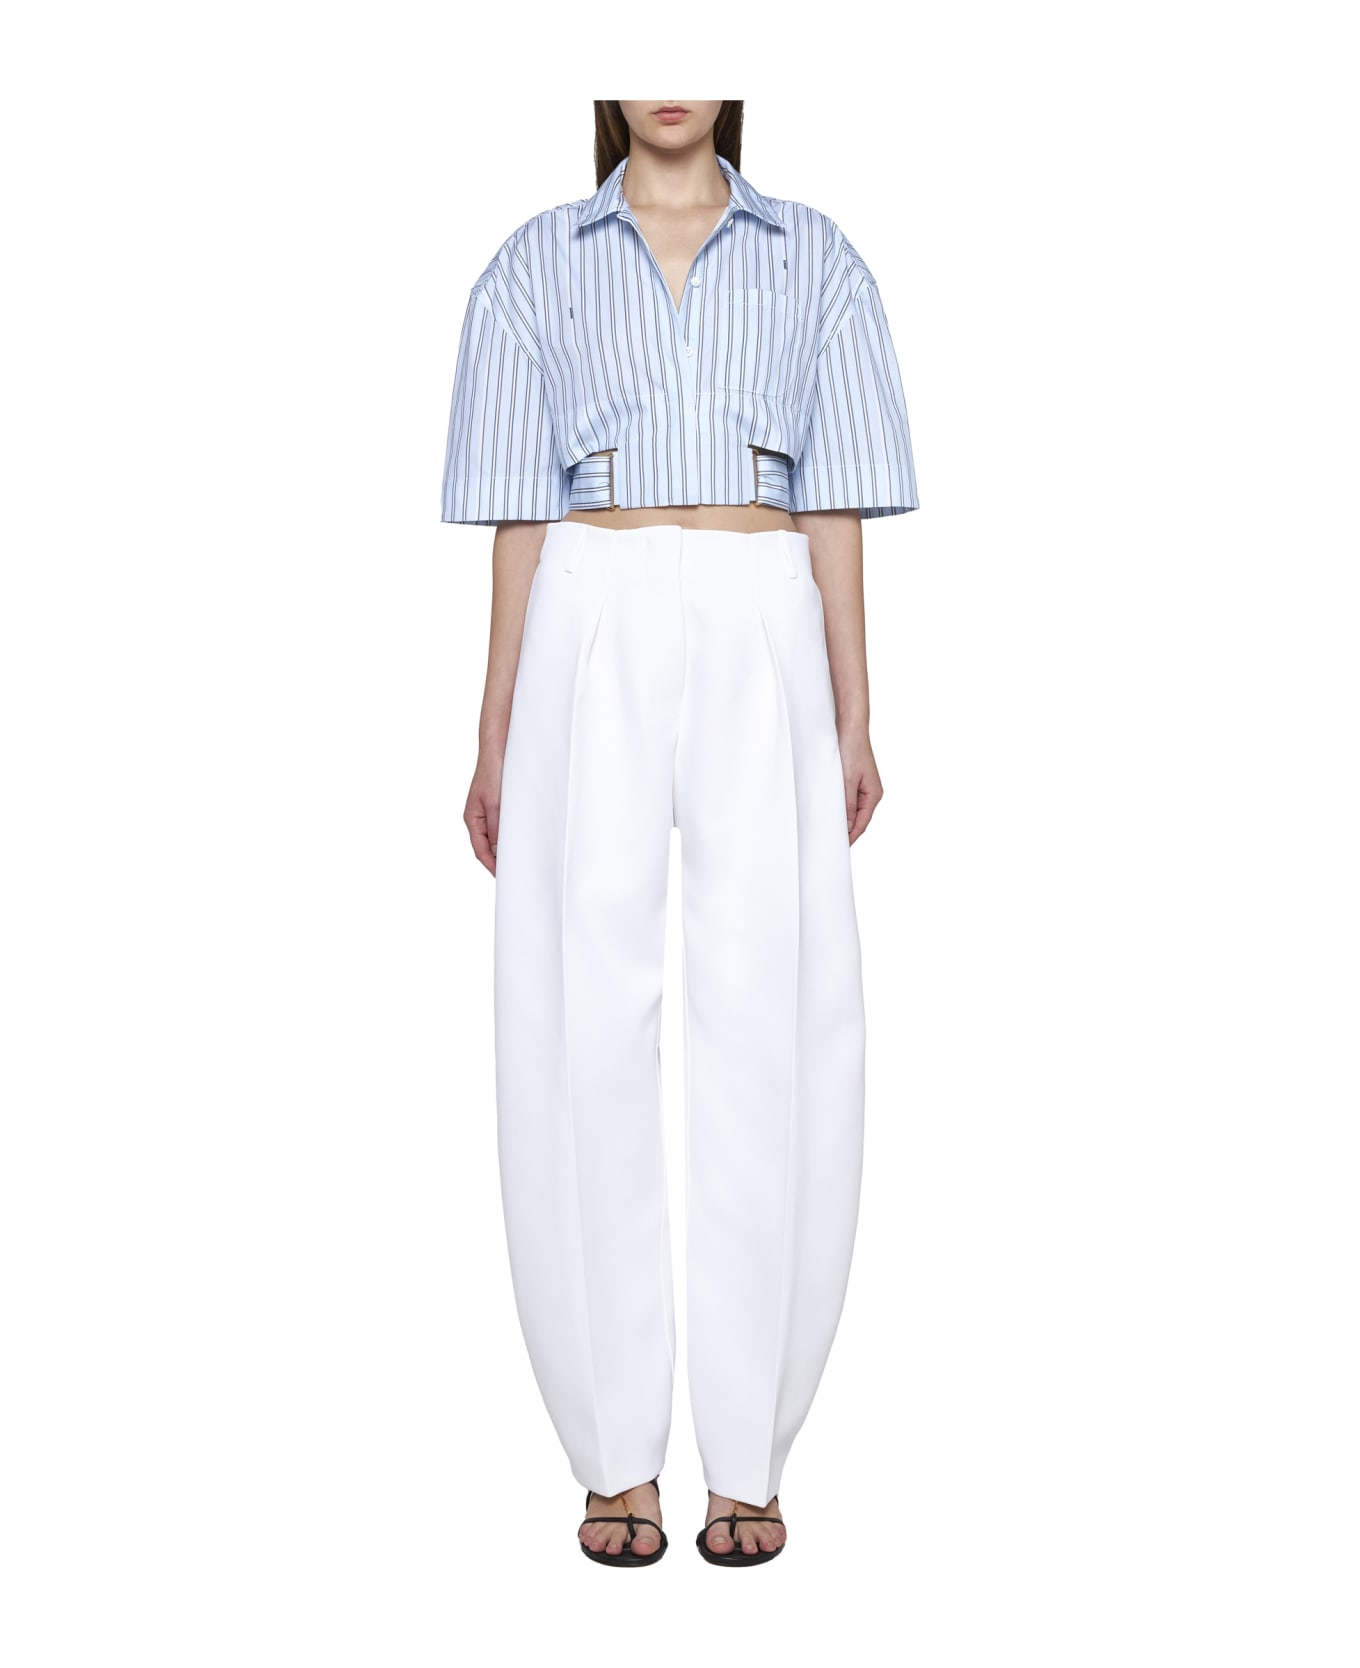 Jacquemus The Oval Trousers - White ボトムス